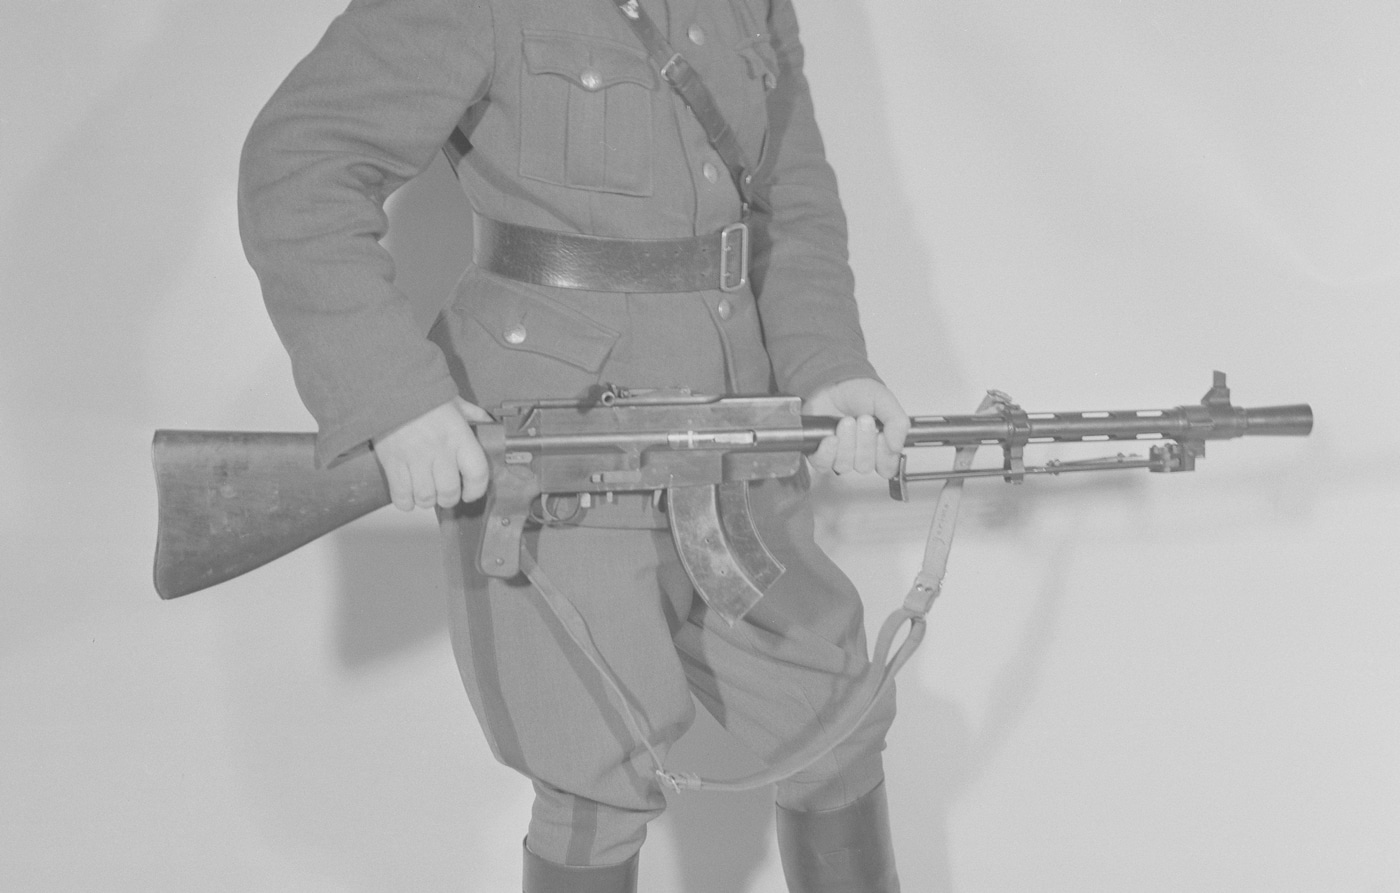 Shown in this picture is a Lahti-Saloranta L/S-26 LMG that was used extensively by the Finland Army in World War 2. It was most famously used in the Winter War and the Continuation War. It also saw action in the Lapland War and Second Sino-Japanese War. The Winter War was a war between the Soviet Union and Finland. It began with a Soviet invasion of Finland on 30 November 1939, three months after the outbreak of World War II, and ended three and a half months later with the Moscow Peace Treaty on 13 March 1940.